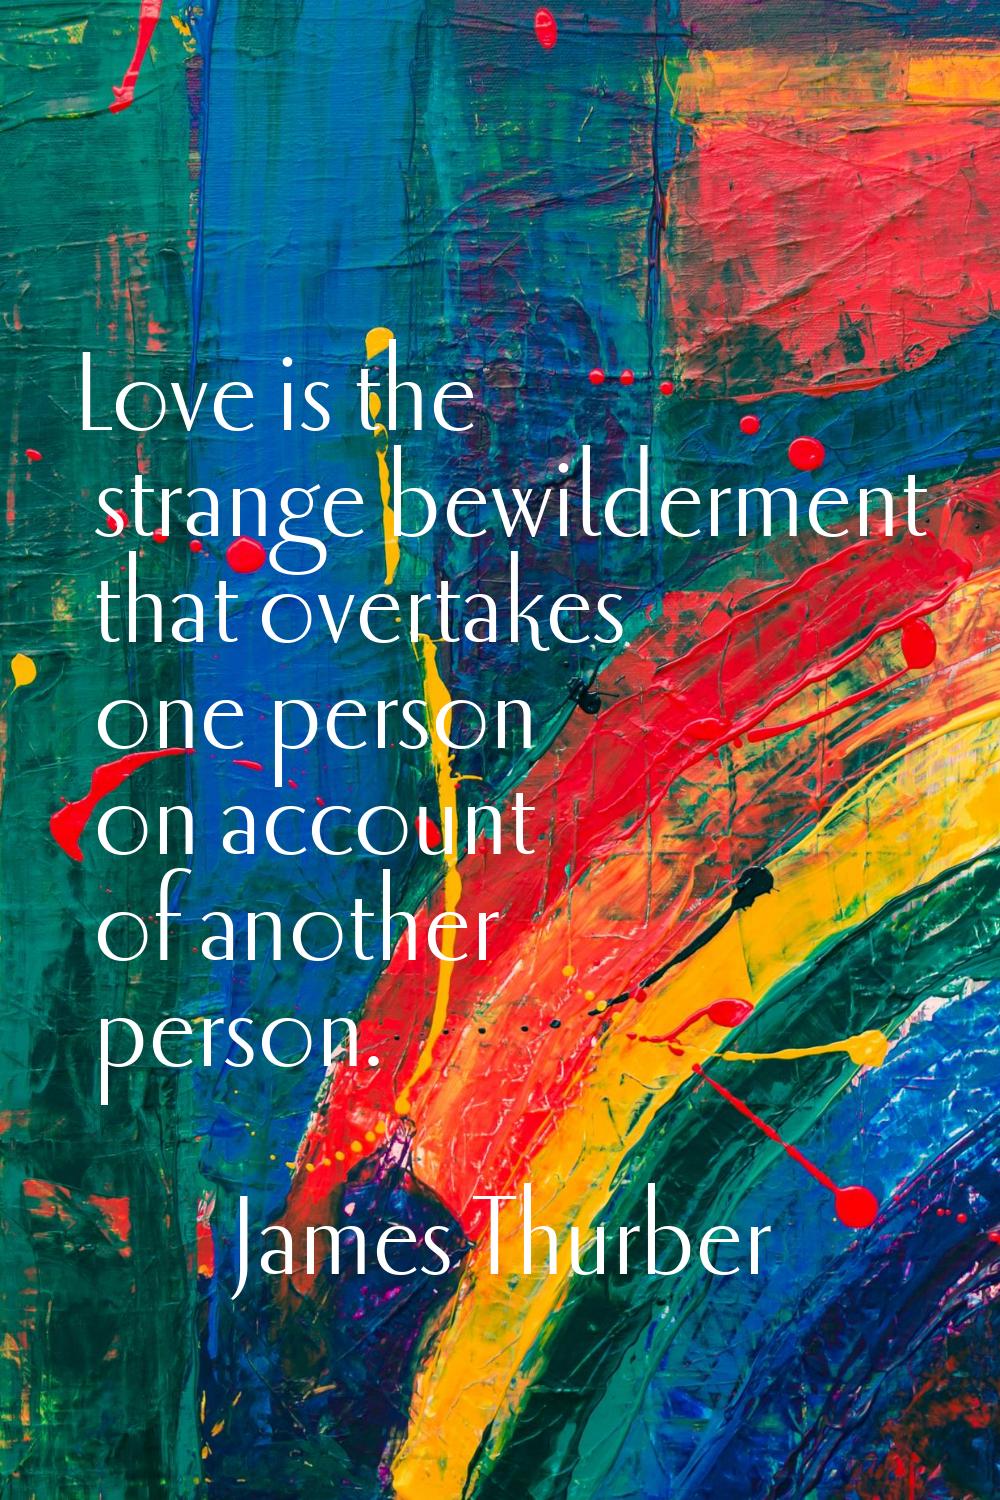 Love is the strange bewilderment that overtakes one person on account of another person.